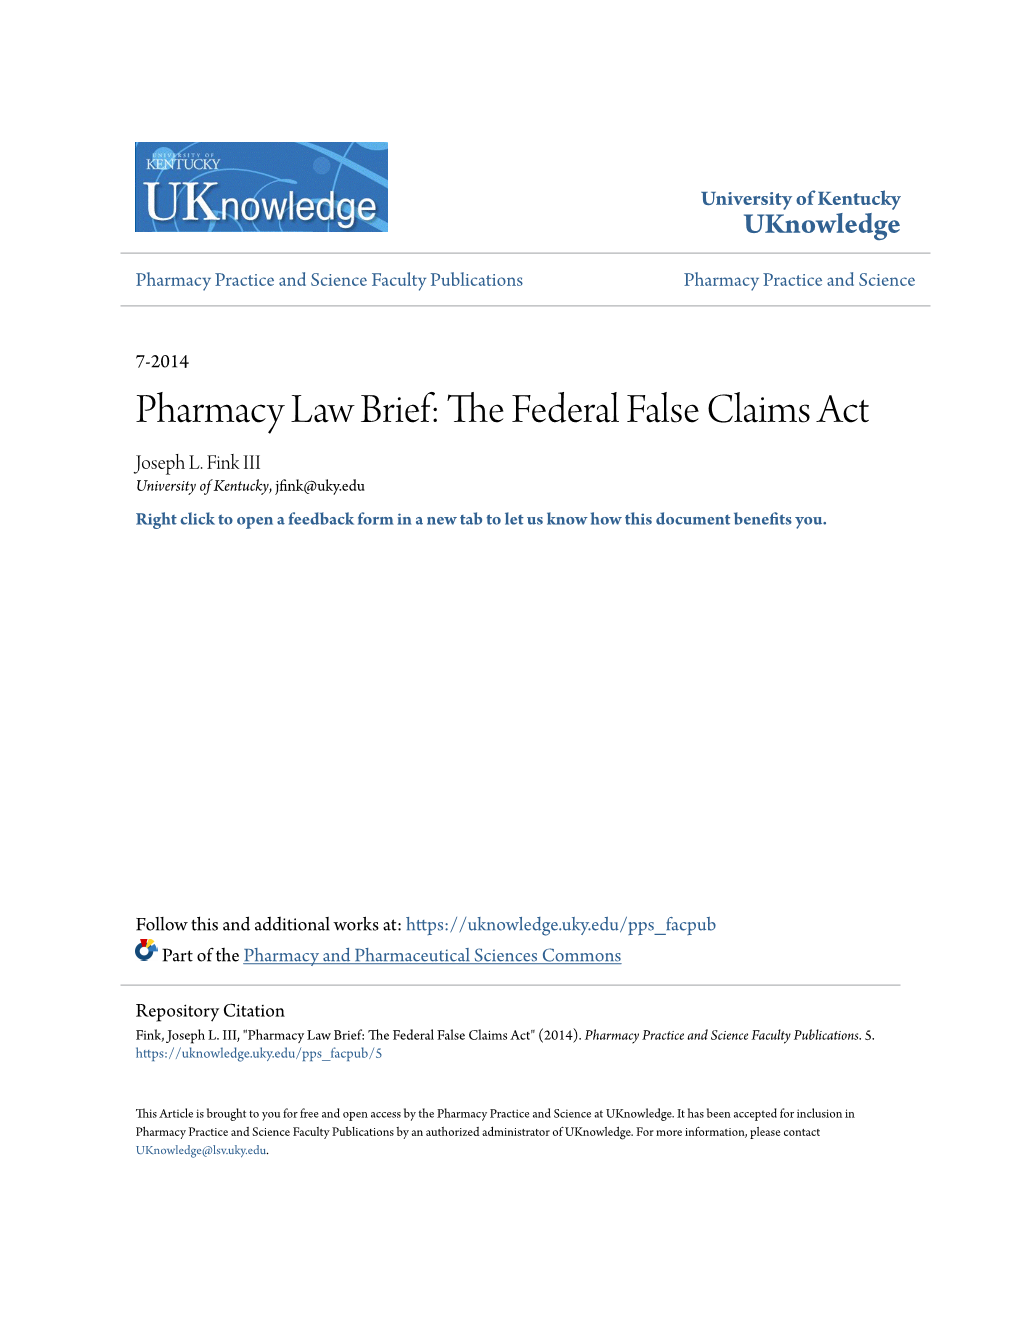 Pharmacy Law Brief: the Federal False Claims Act